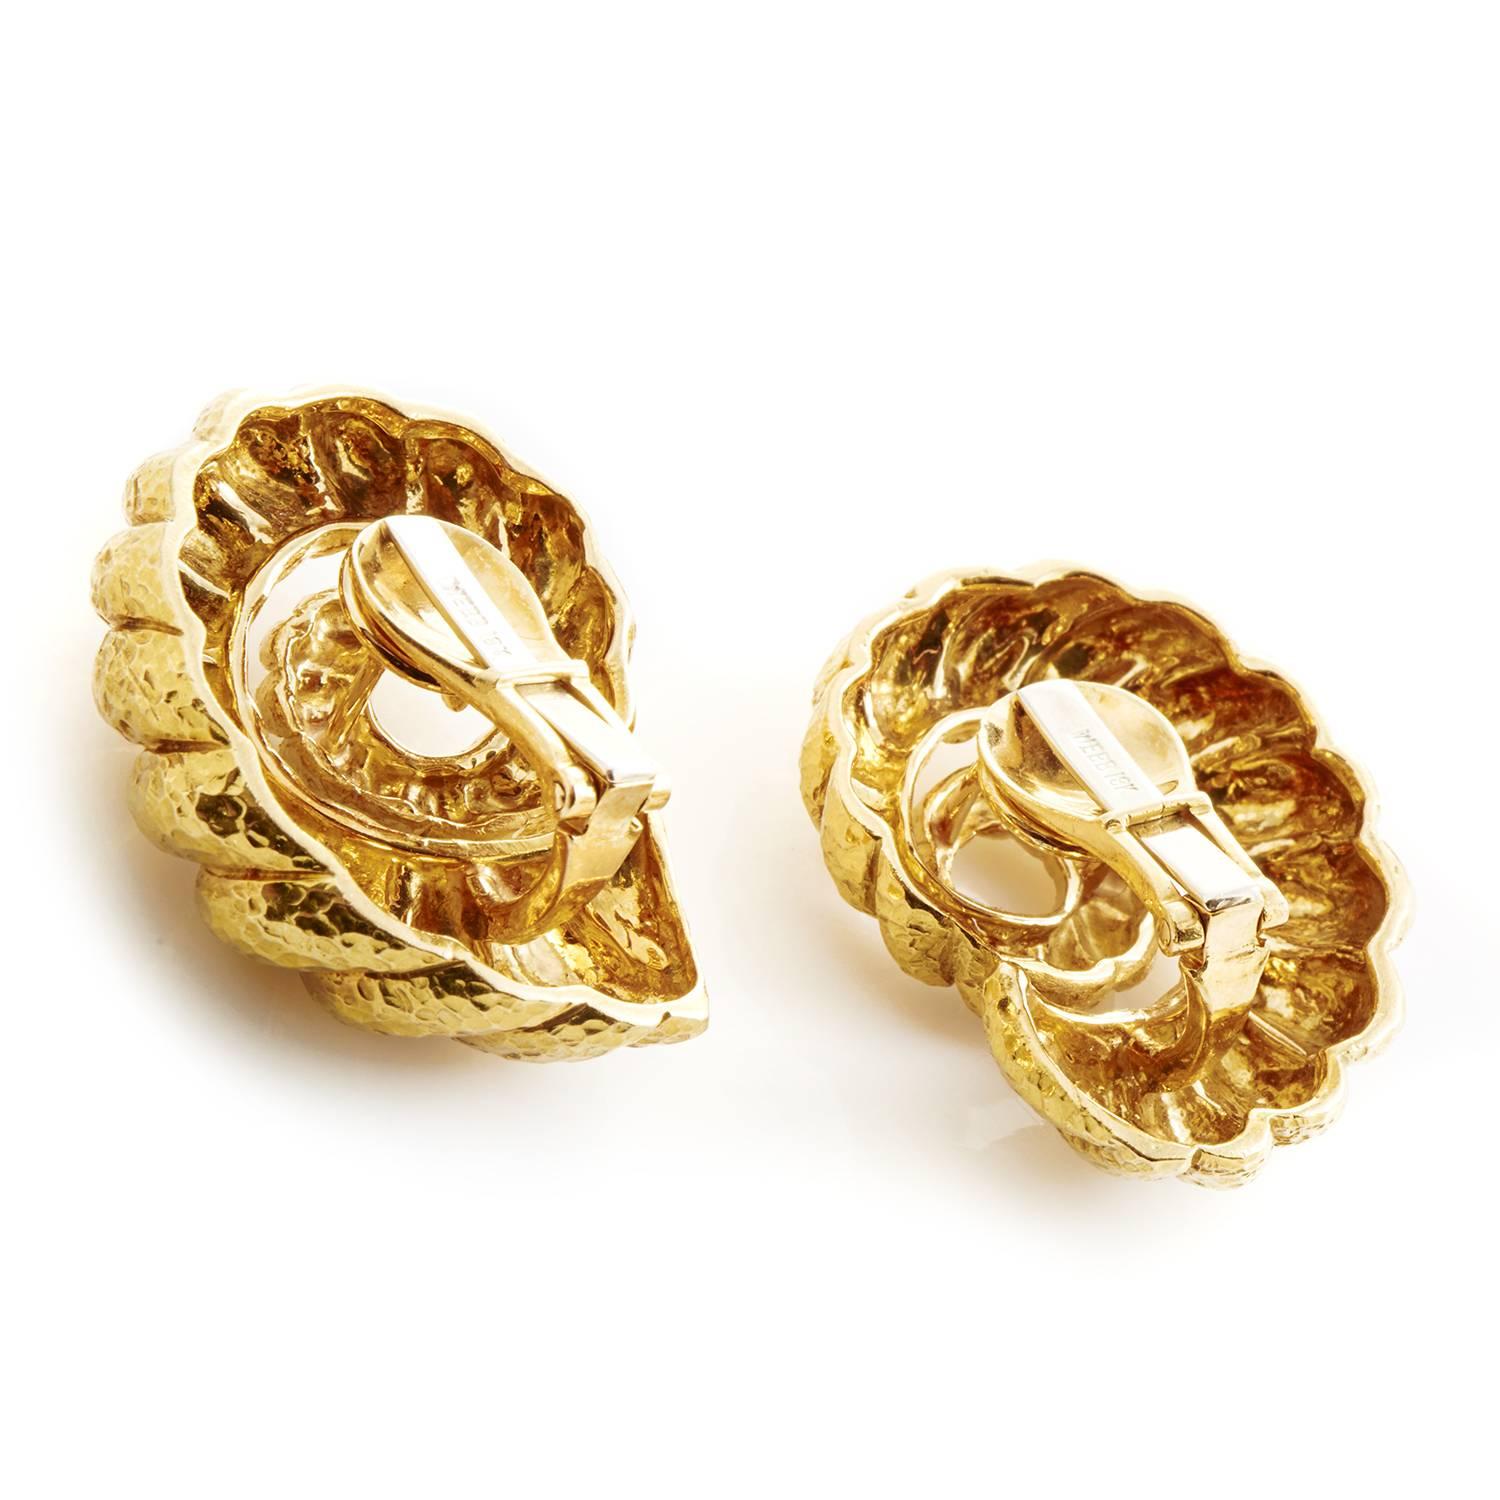 With an intriguingly rough finish that produces scintillating play of light upon the fabulously warm surface of 18K yellow gold, these nifty earrings from David Webb are molded into a marvelous shape of a coiled rope.